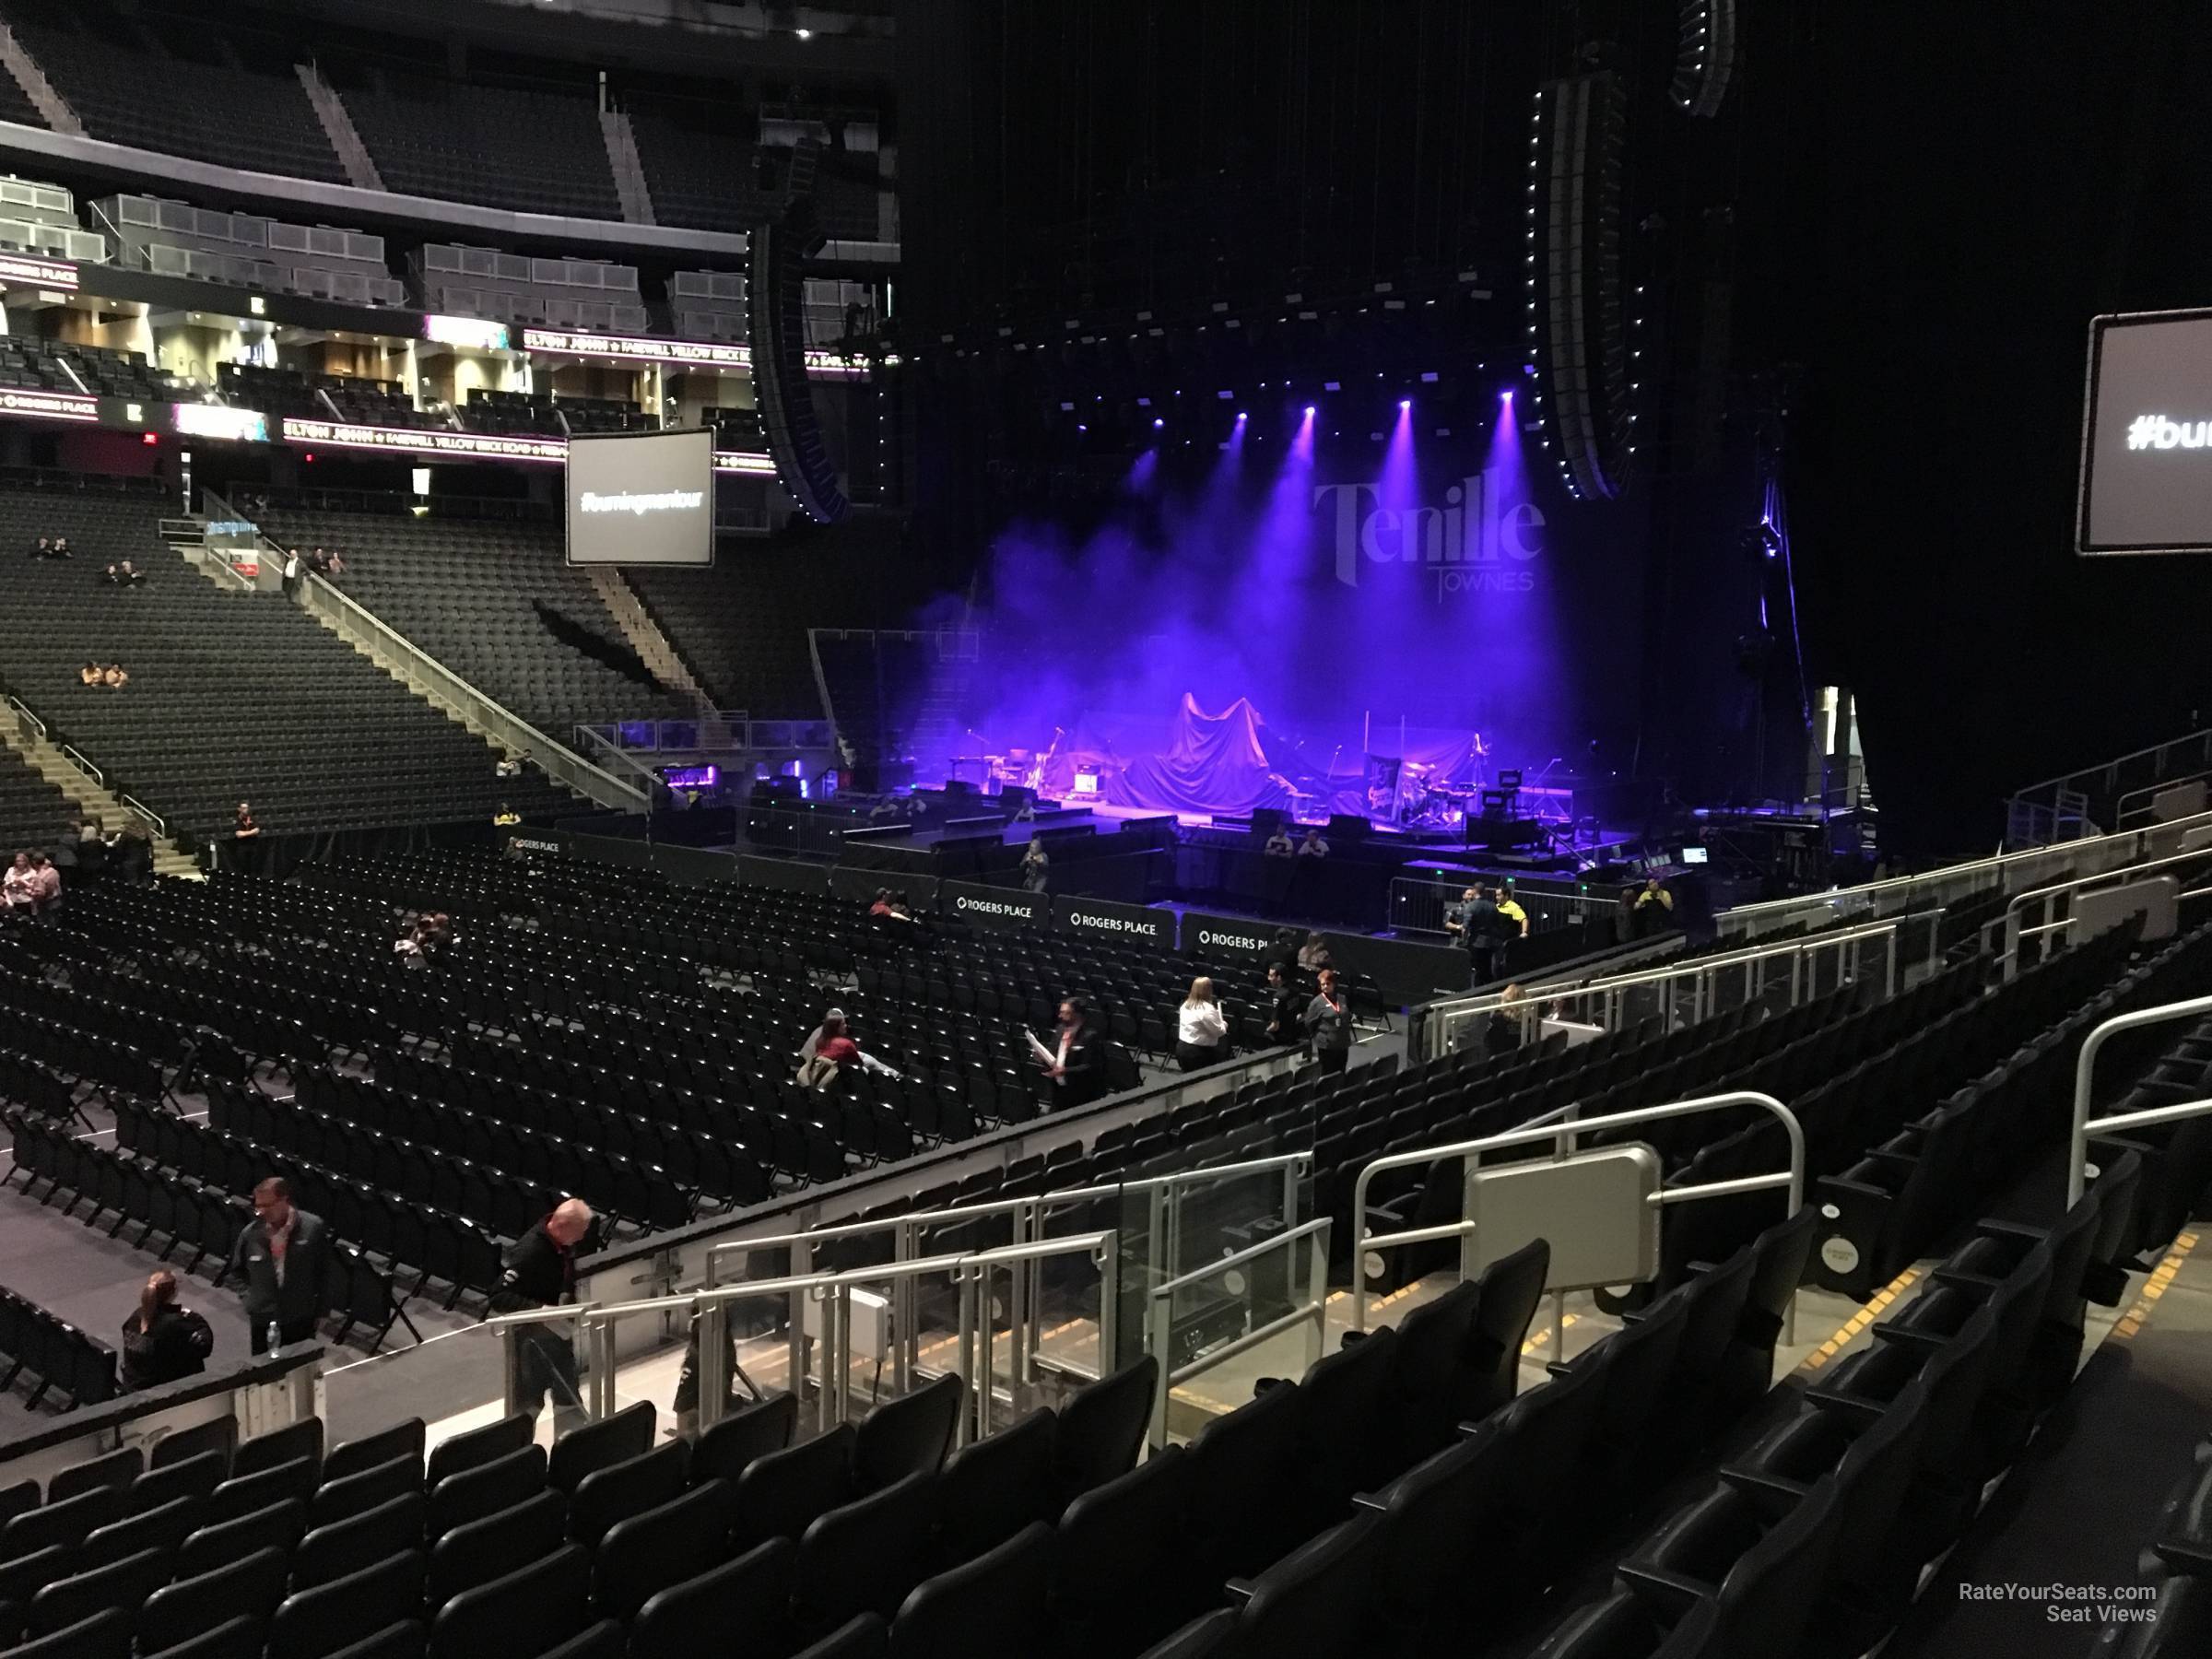 Section 103 at Rogers Place for Concerts